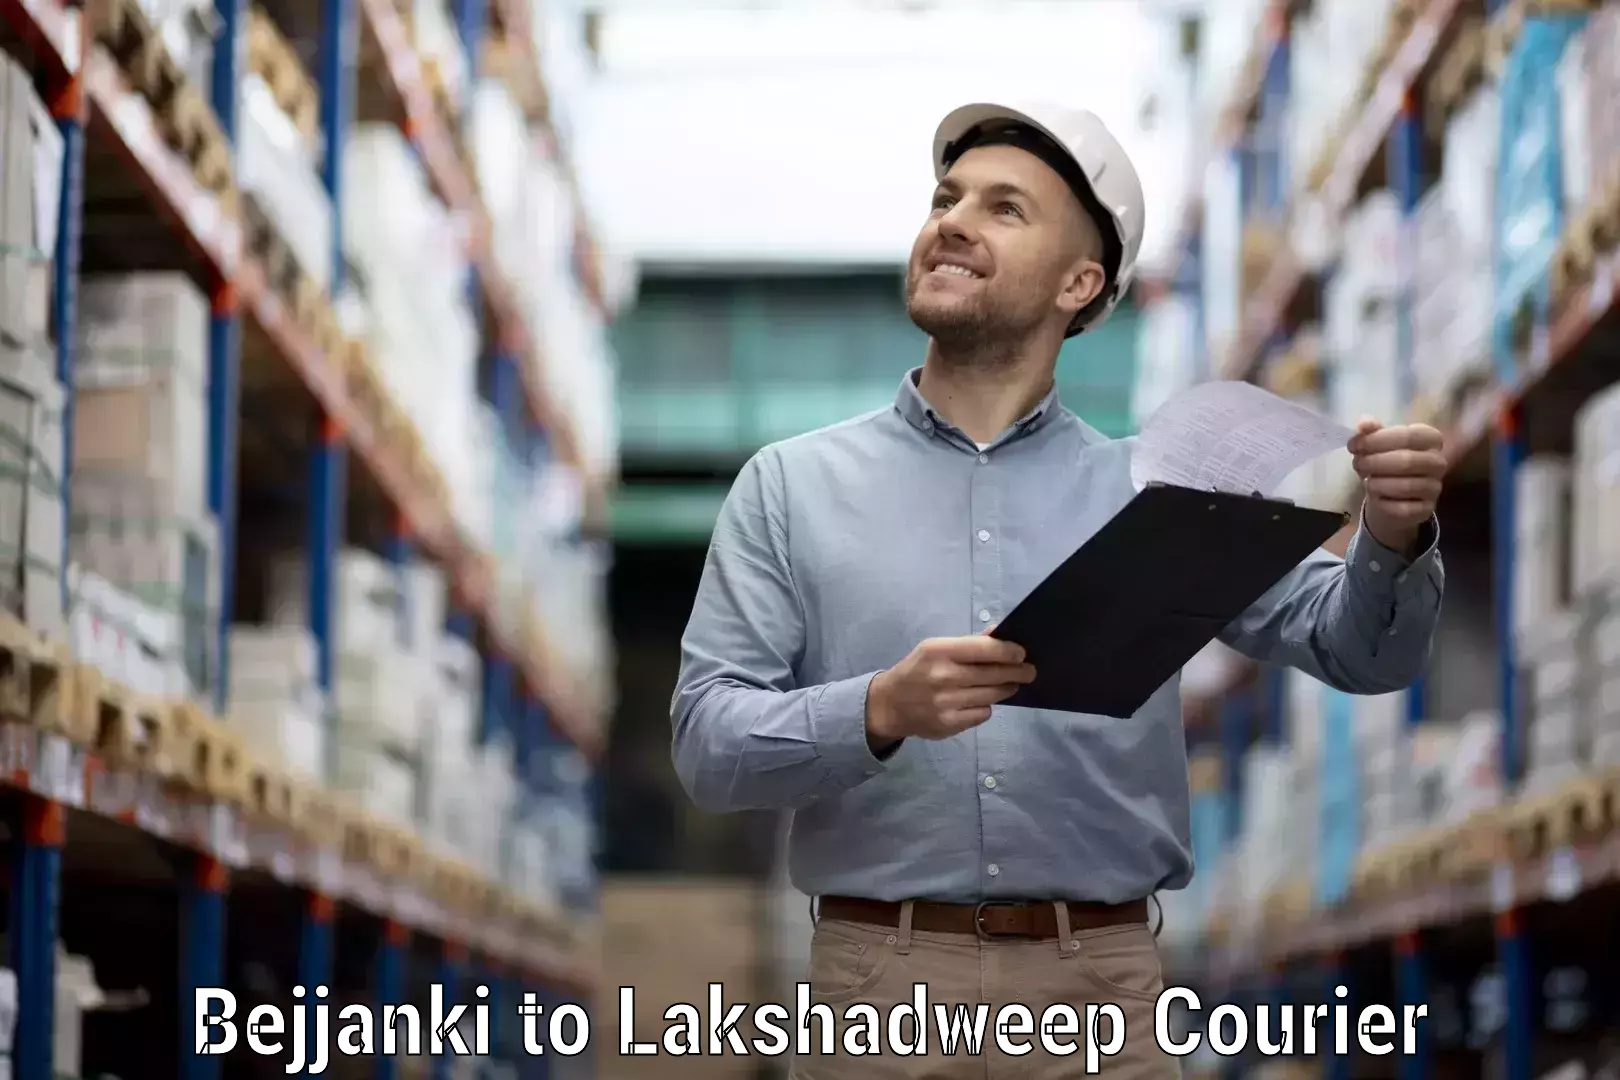 On-call courier service Bejjanki to Lakshadweep